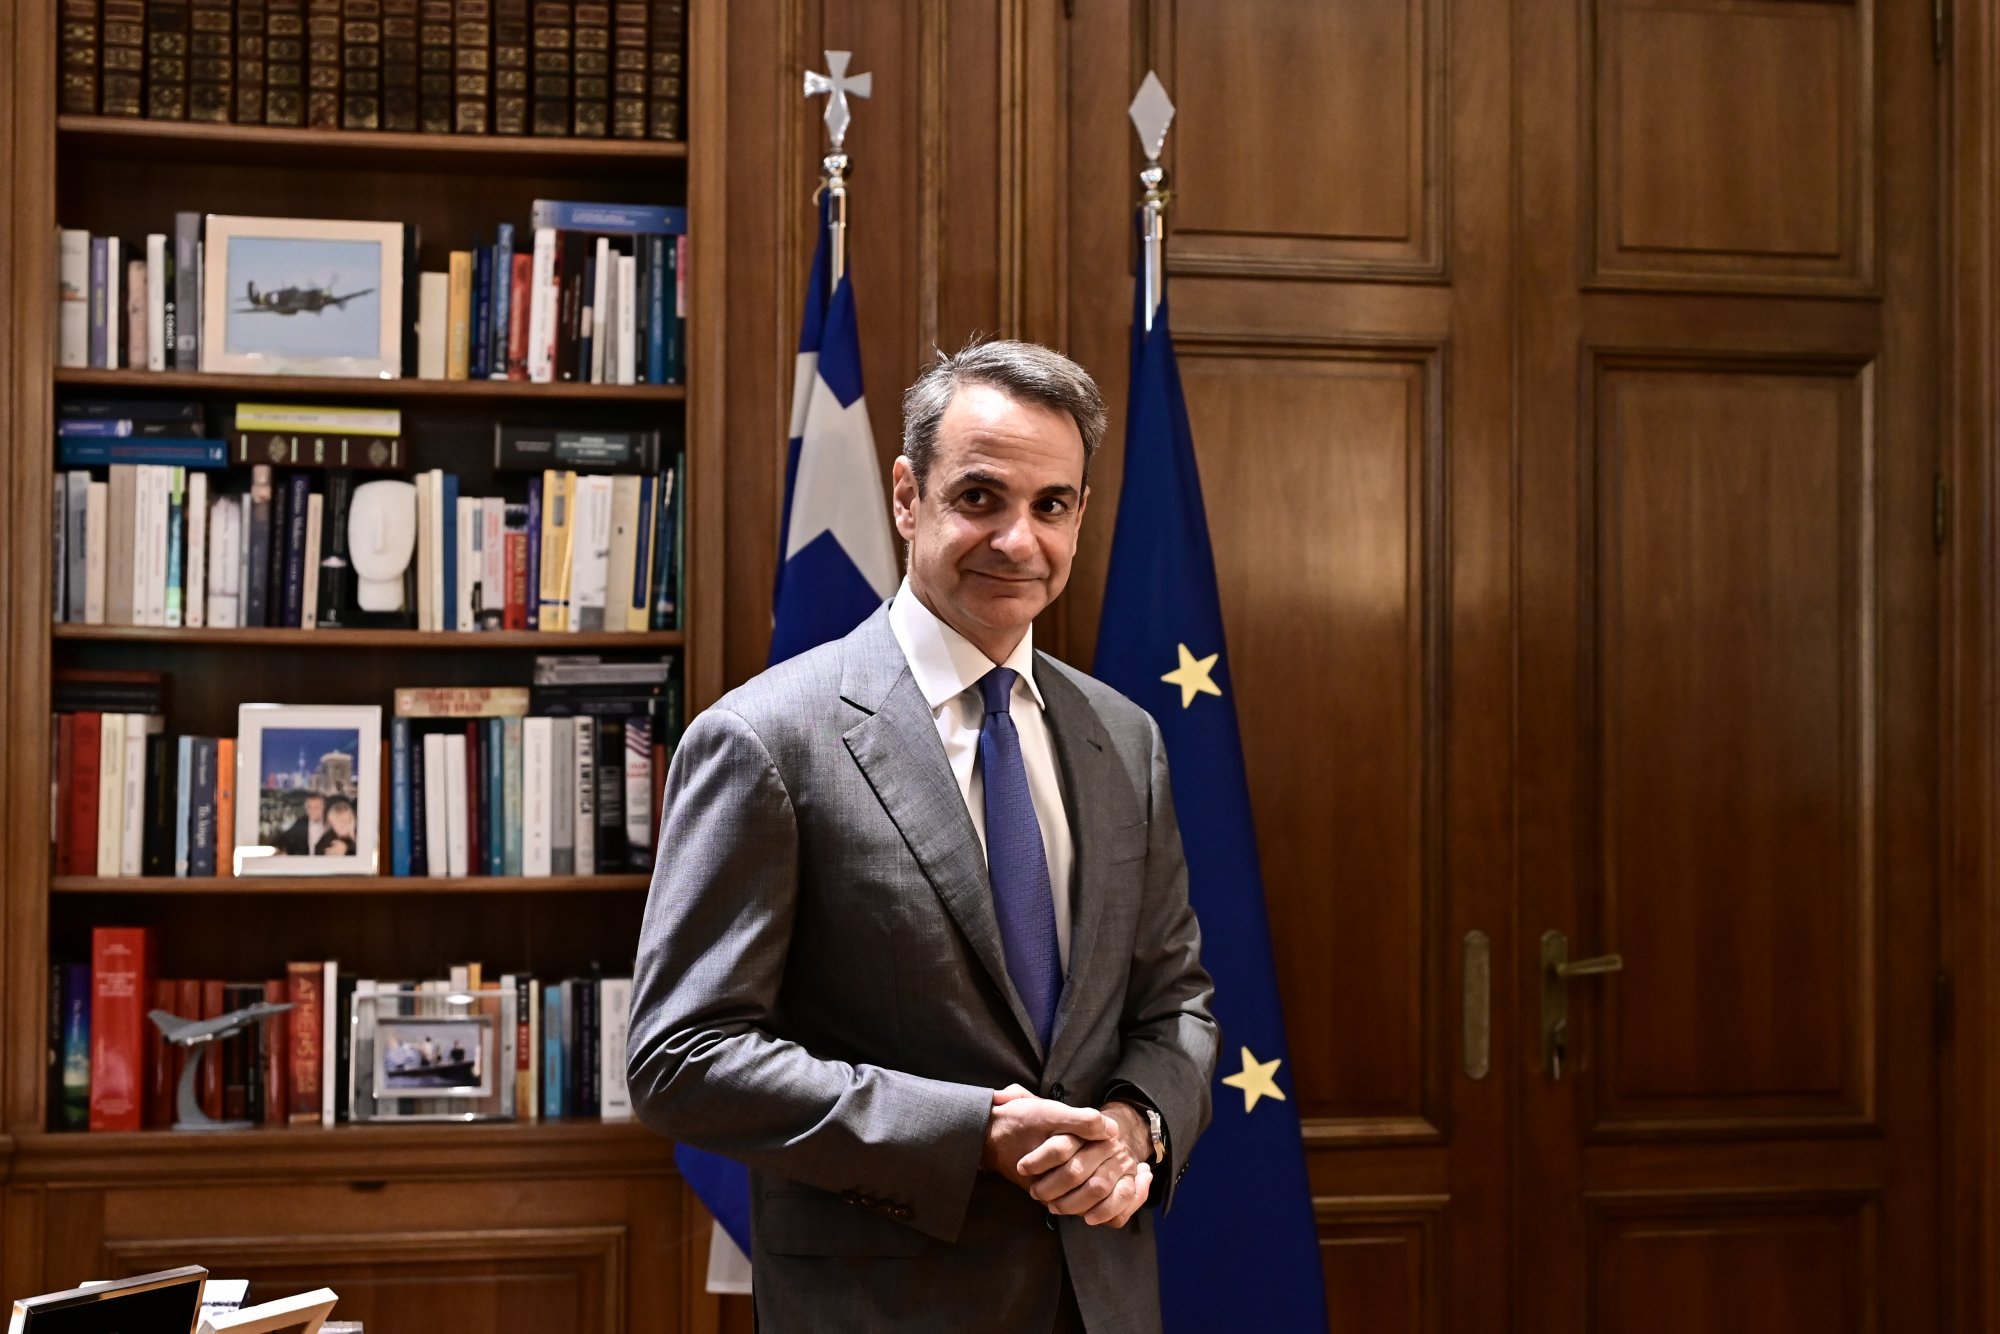 “Respect for humanitarian law” – The Greek PM’s 3 hours at the Elysee, the personal talks with the Palestinian prime minister